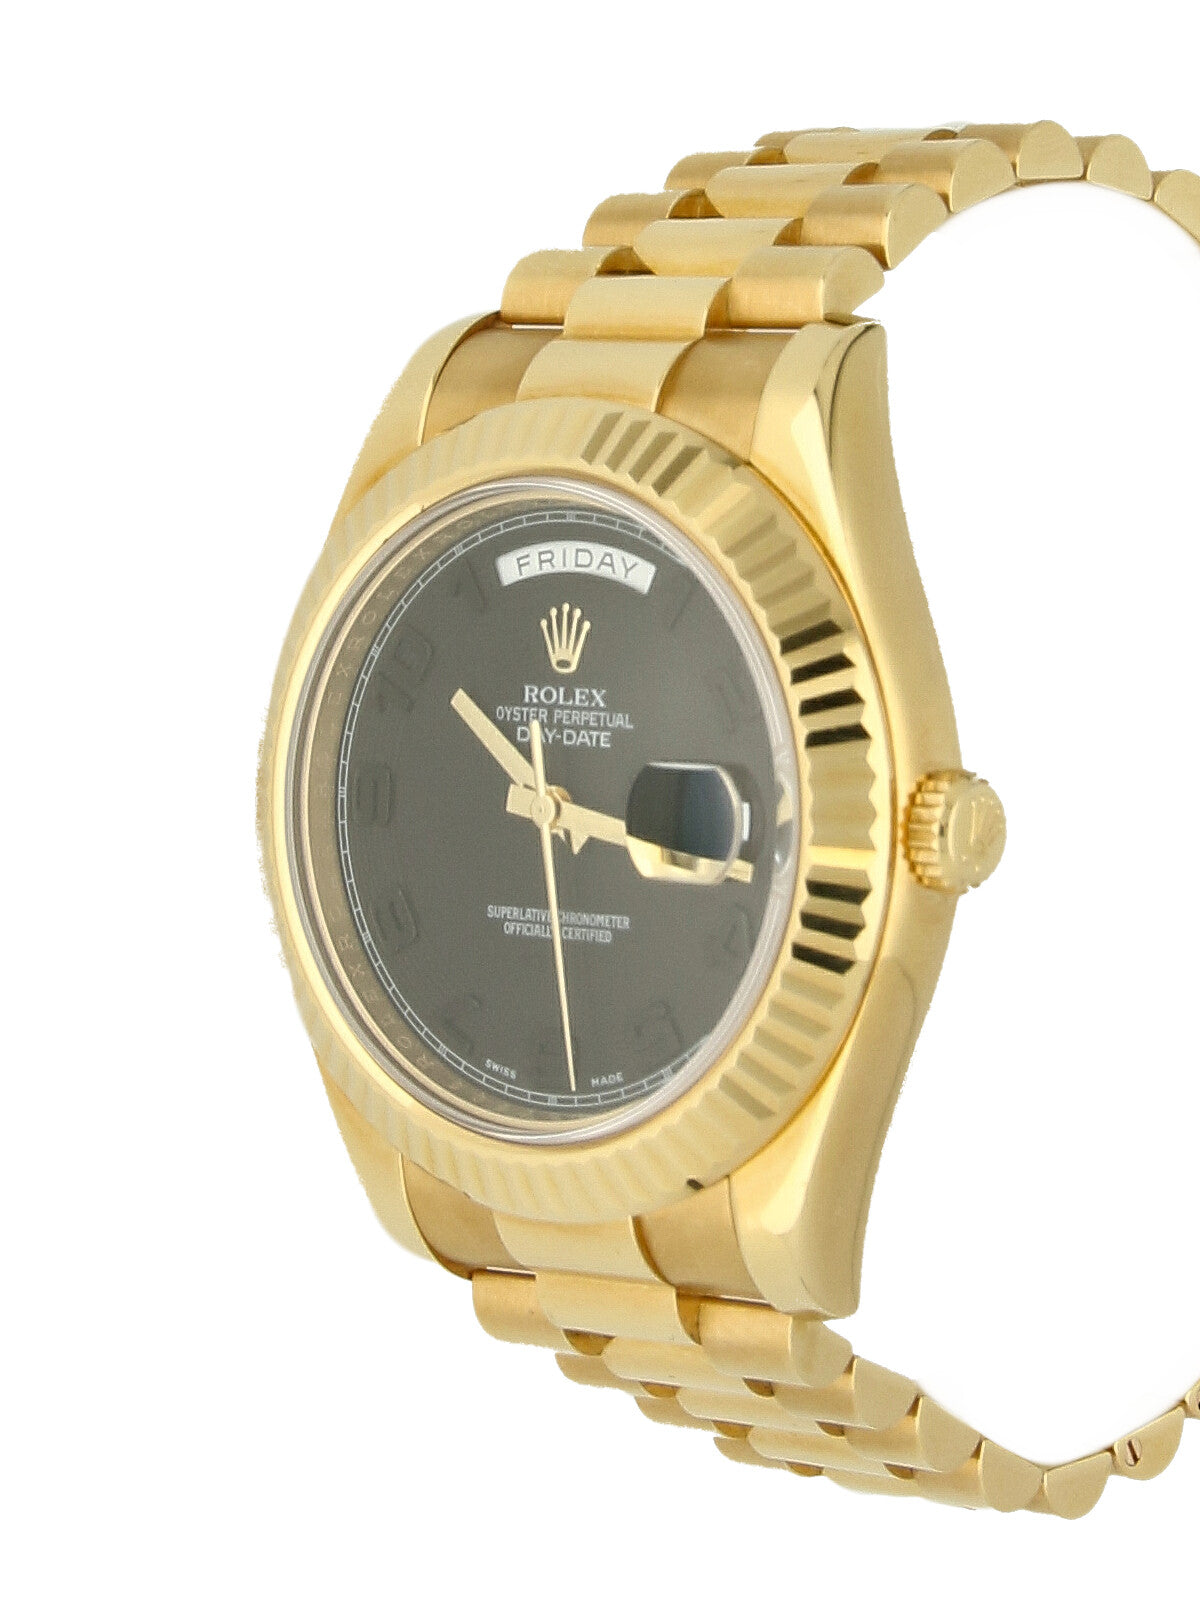 Pre Owned Rolex Day Date II 18ct Yellow Gold Automatic 41mm Watch on President Bracelet